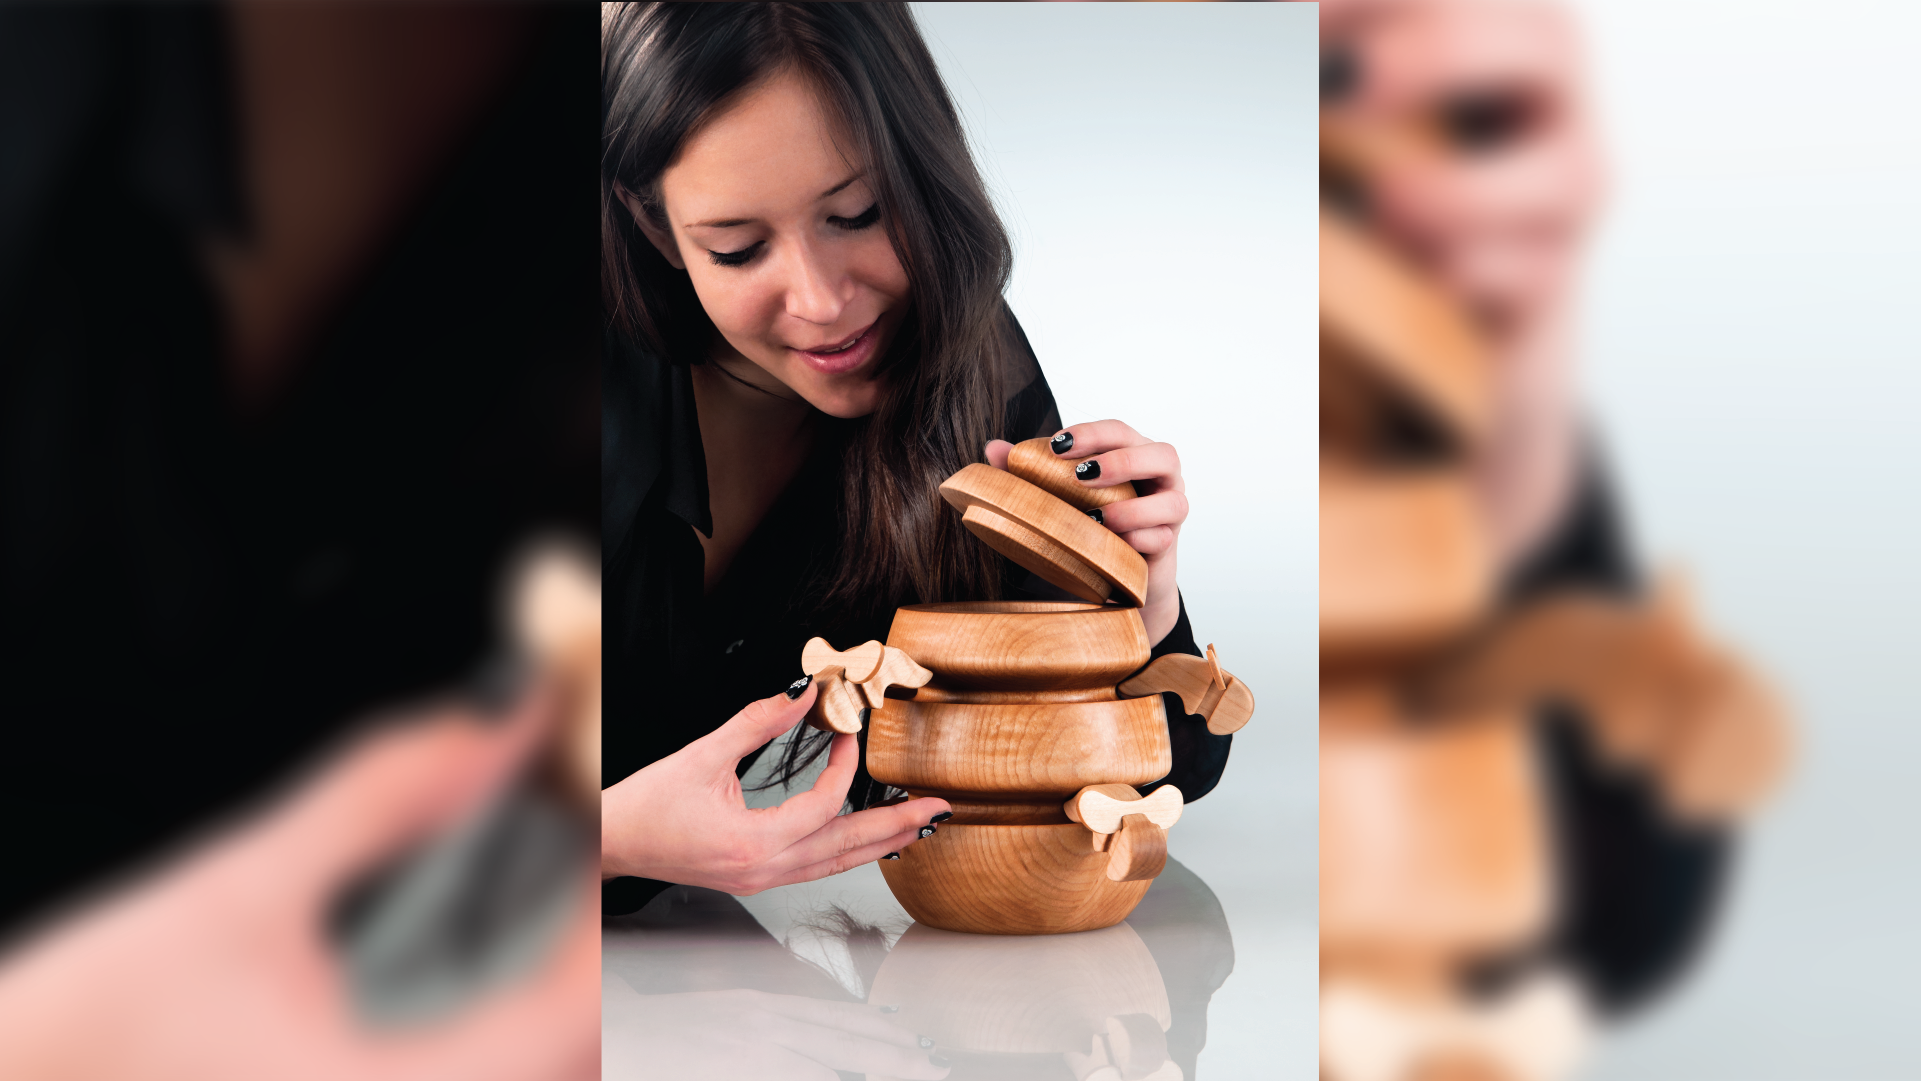 Person interacting with the wooden vessel, opening the lid and hanging a bees on the outside.